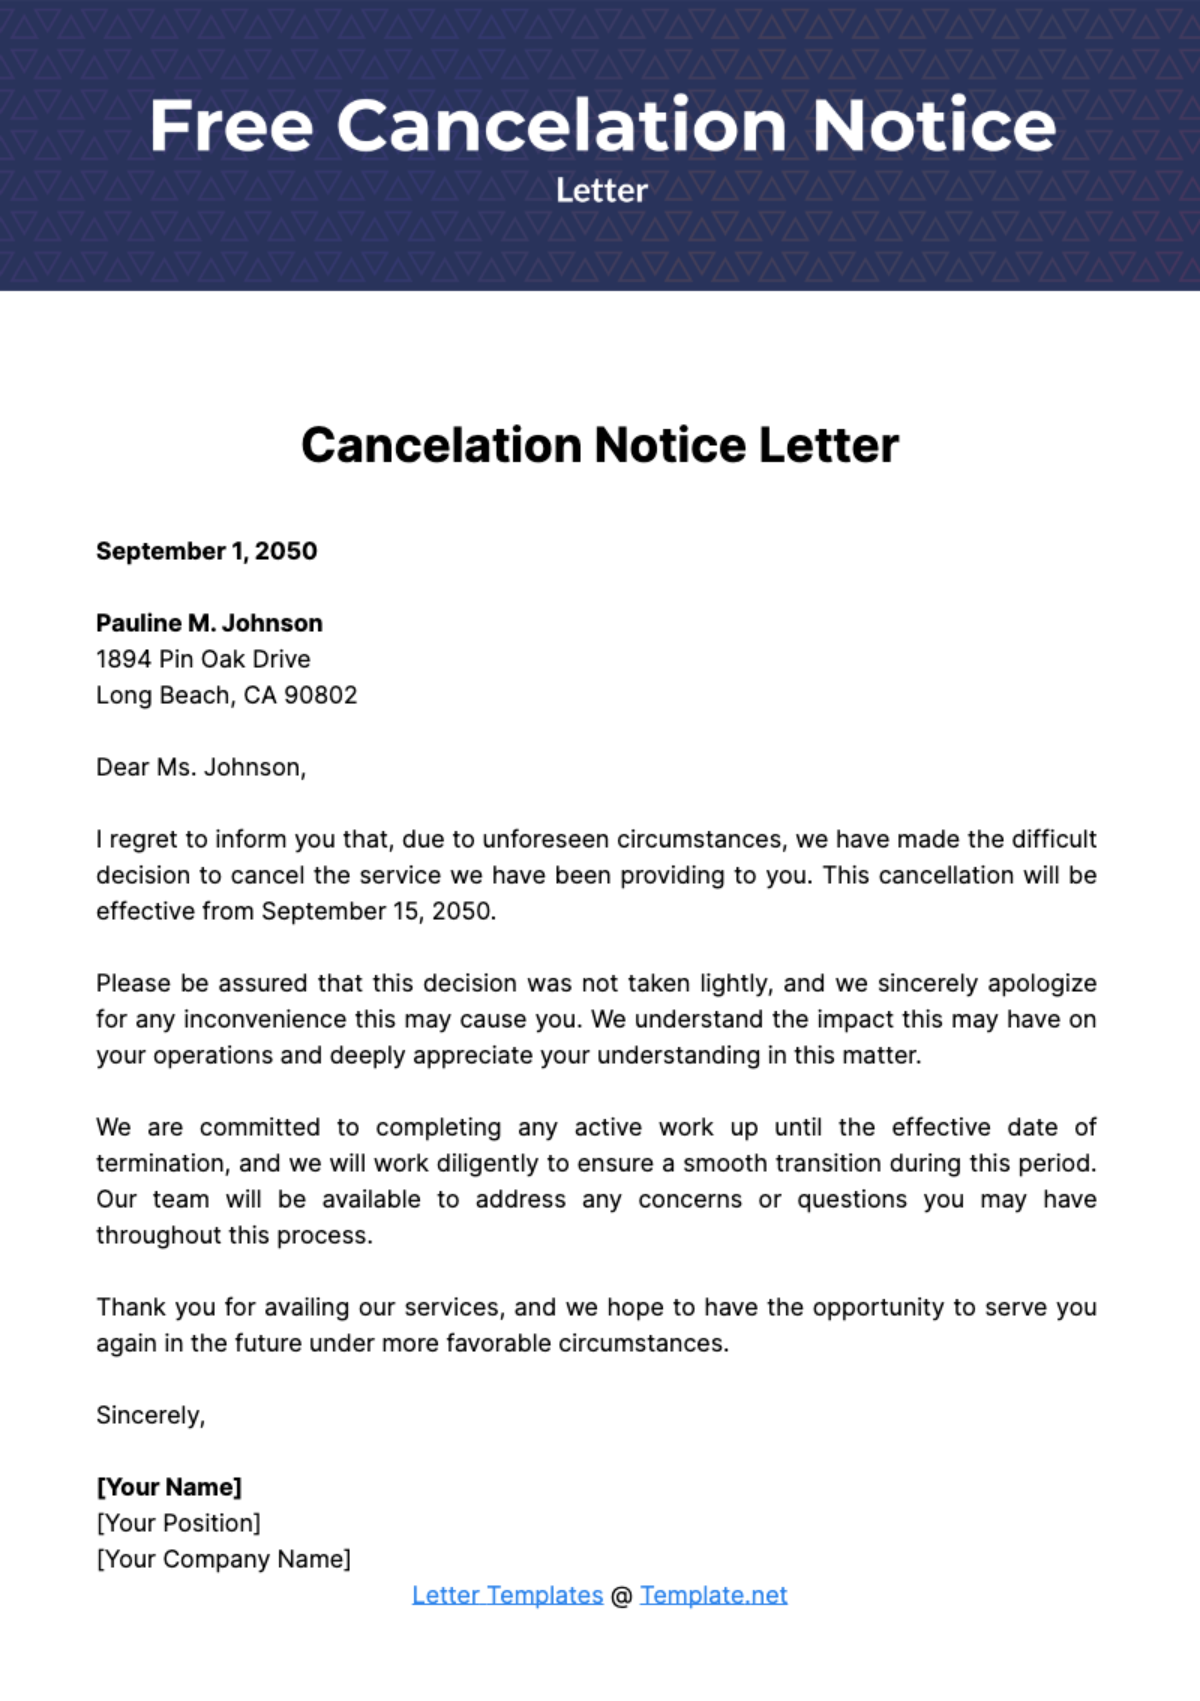 Free Cancelation Notice Letter Template